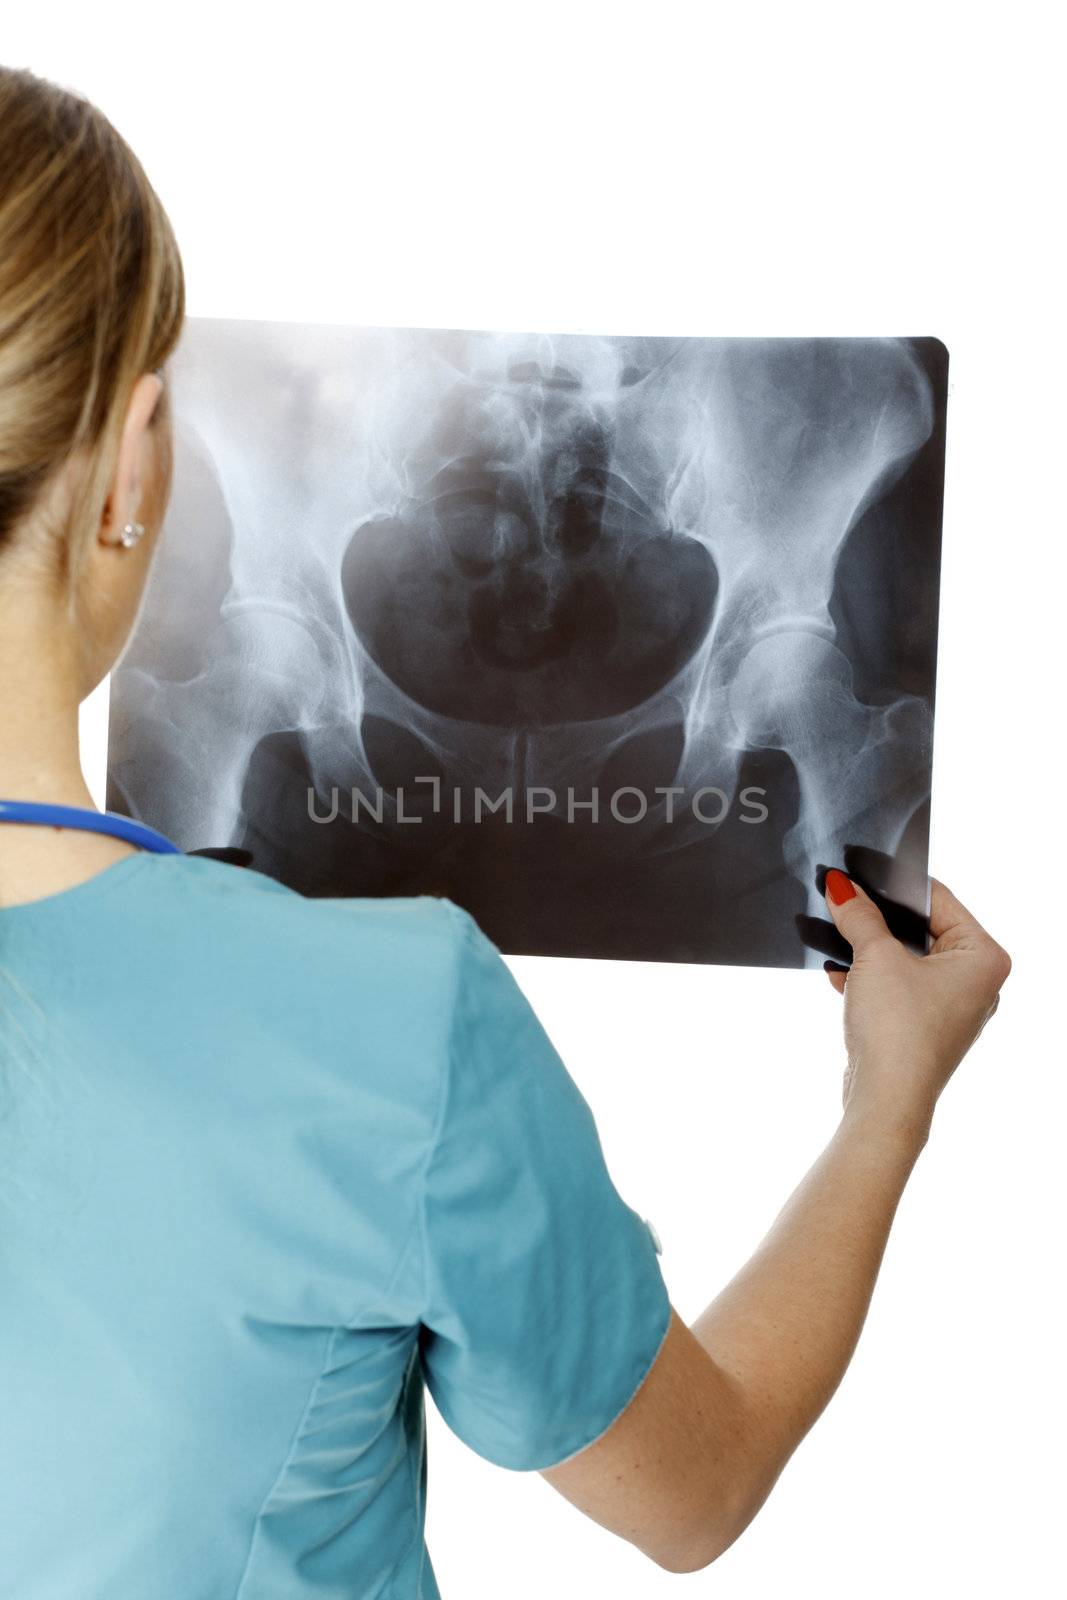 Female doctor examining an x-ray image. Focus is on the x-ray im by Nobilior